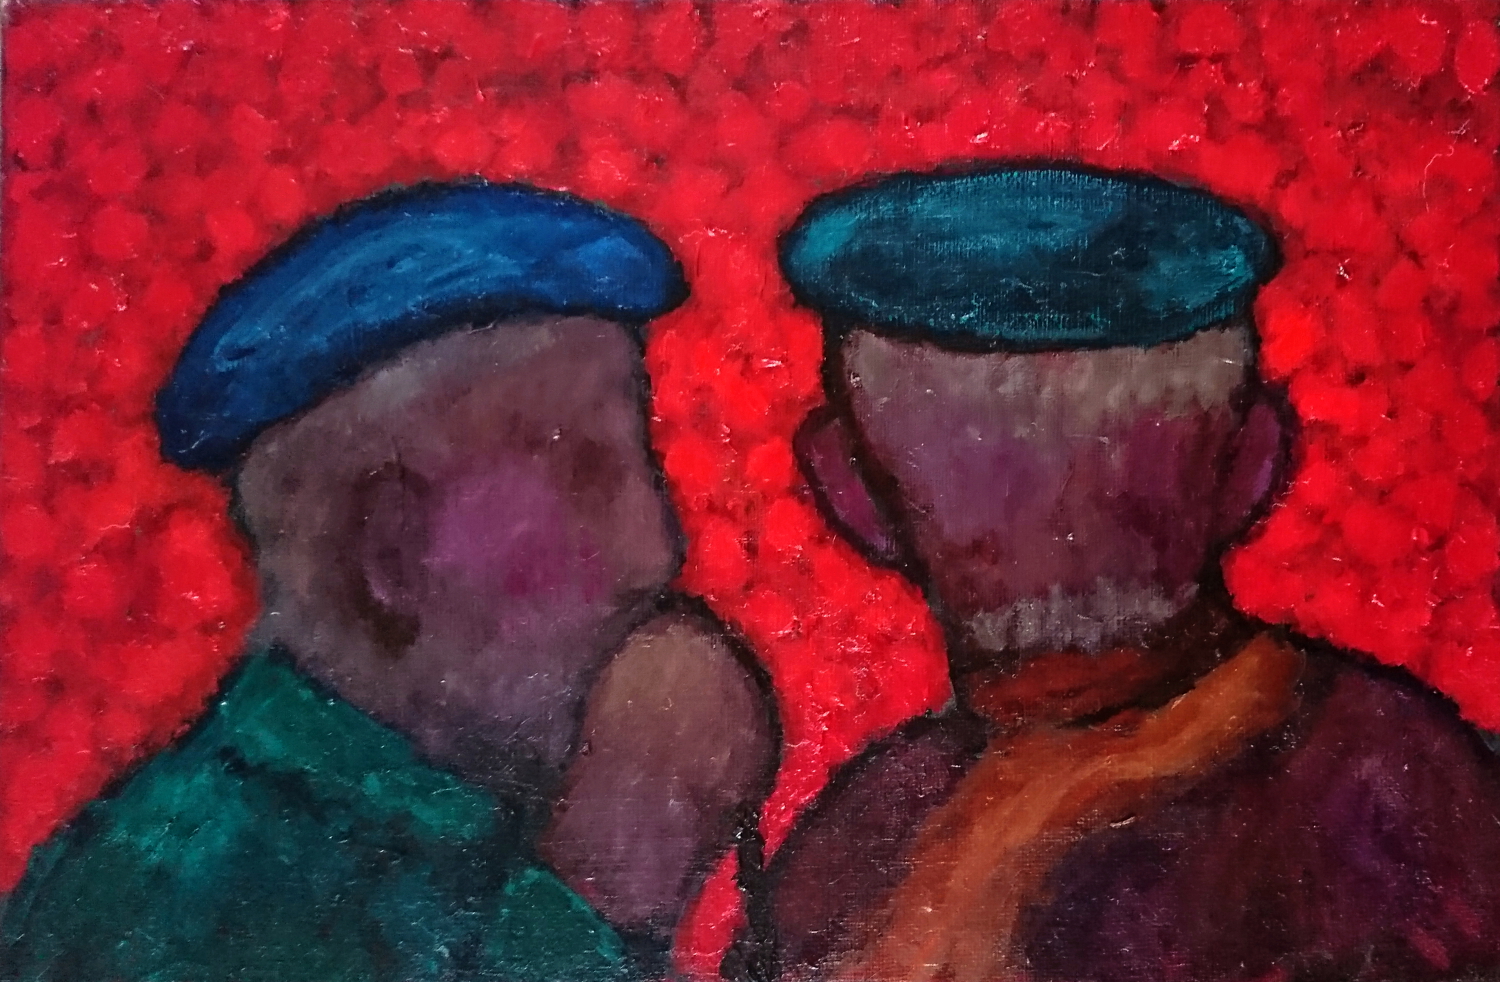 Two-Old-Men-41-x-27-cm-oil-on-canvas-web